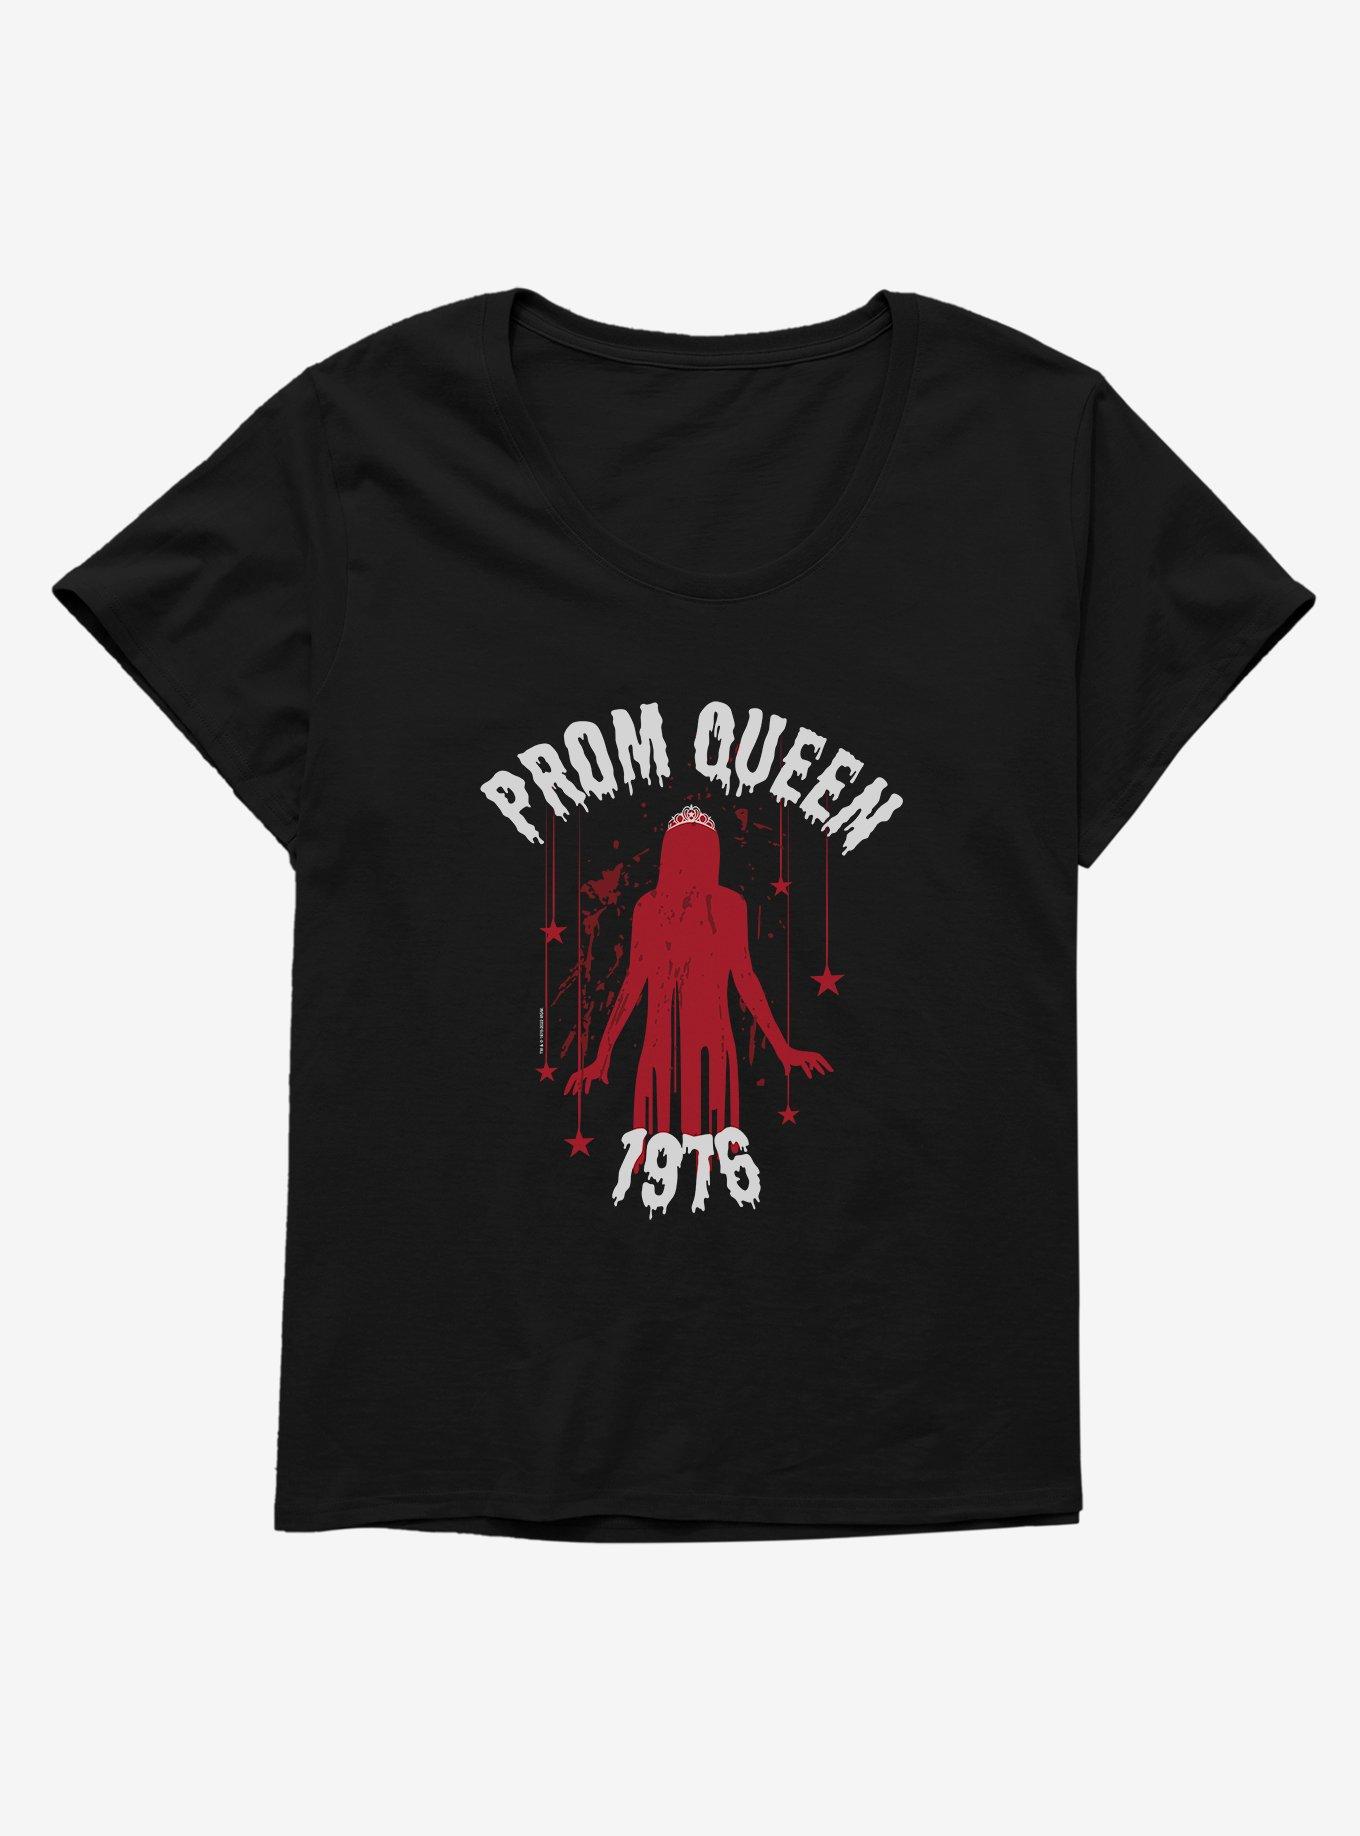 Carrie 1976 Red Silhouette Girls T-Shirt Plus